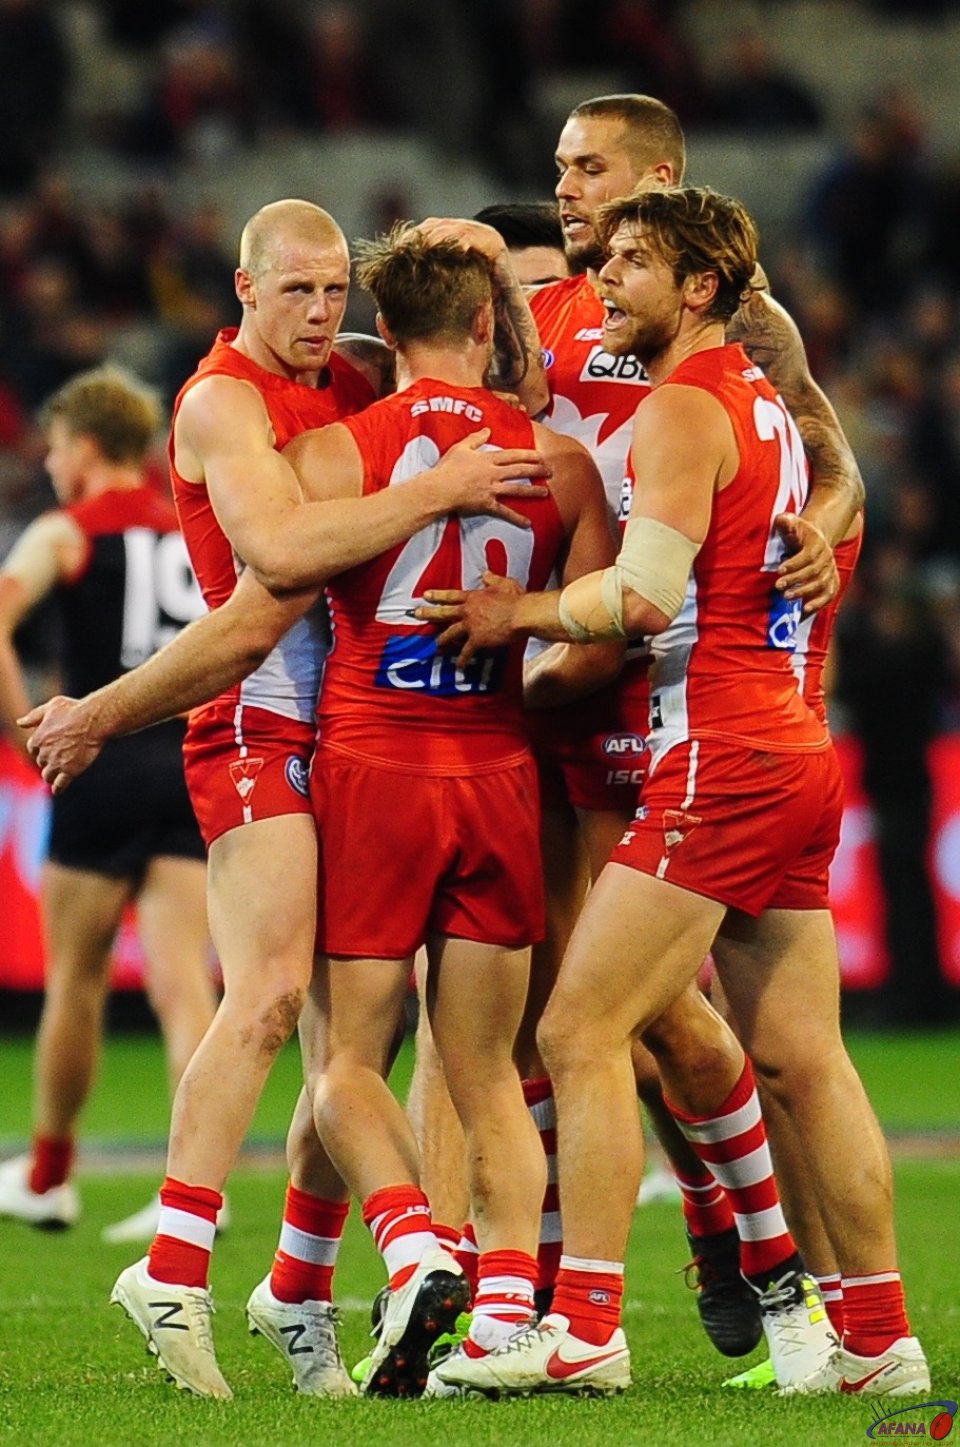 Luke Parker is mobbed by his team mates